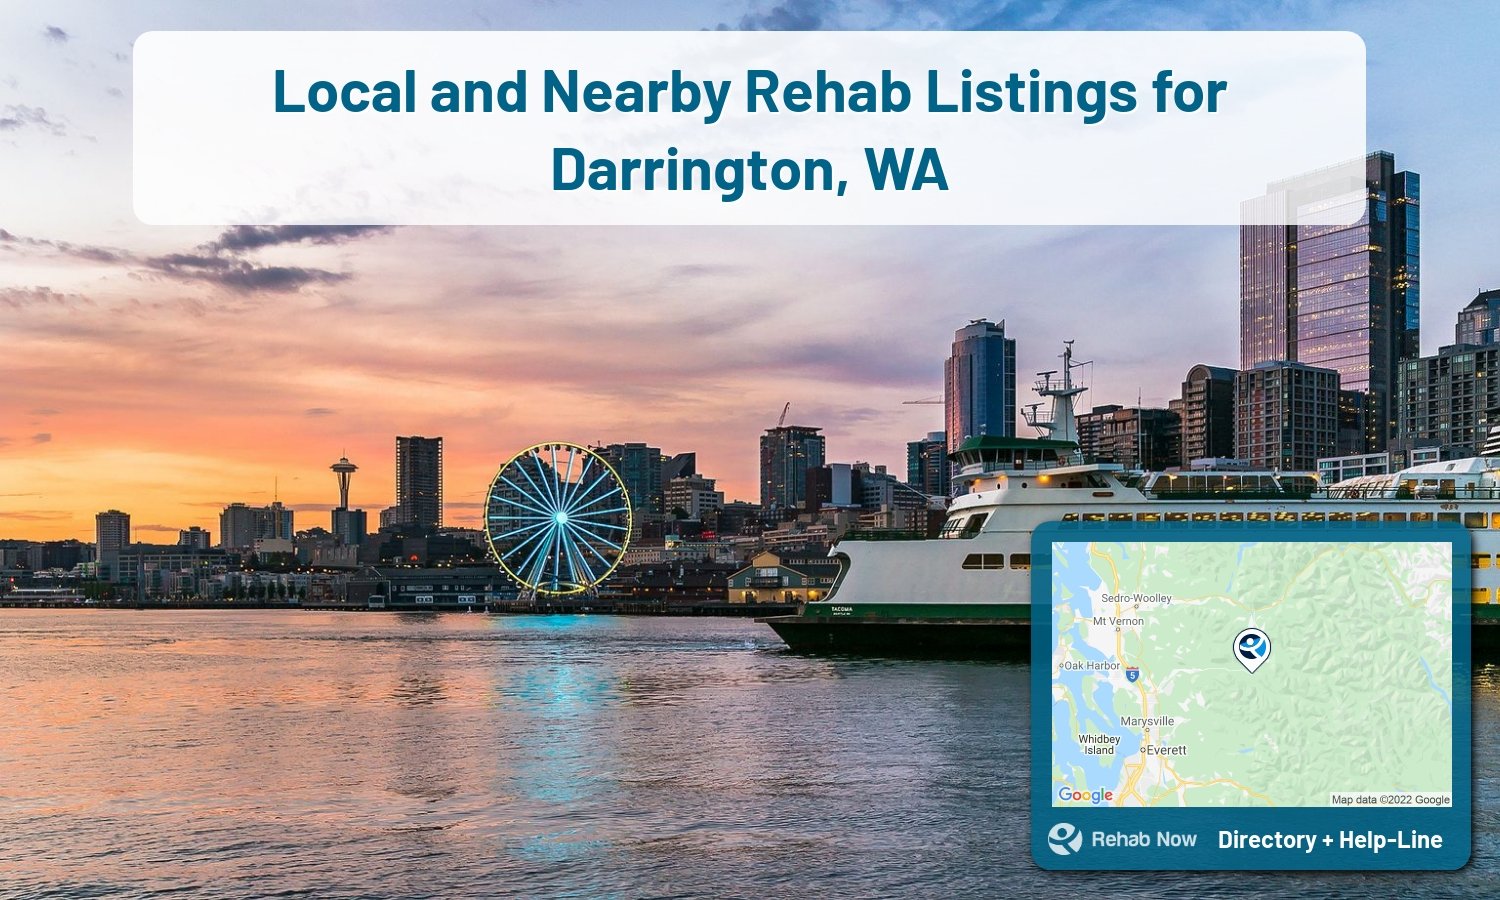 List of alcohol and drug treatment centers near you in Darrington, Washington. Research certifications, programs, methods, pricing, and more.